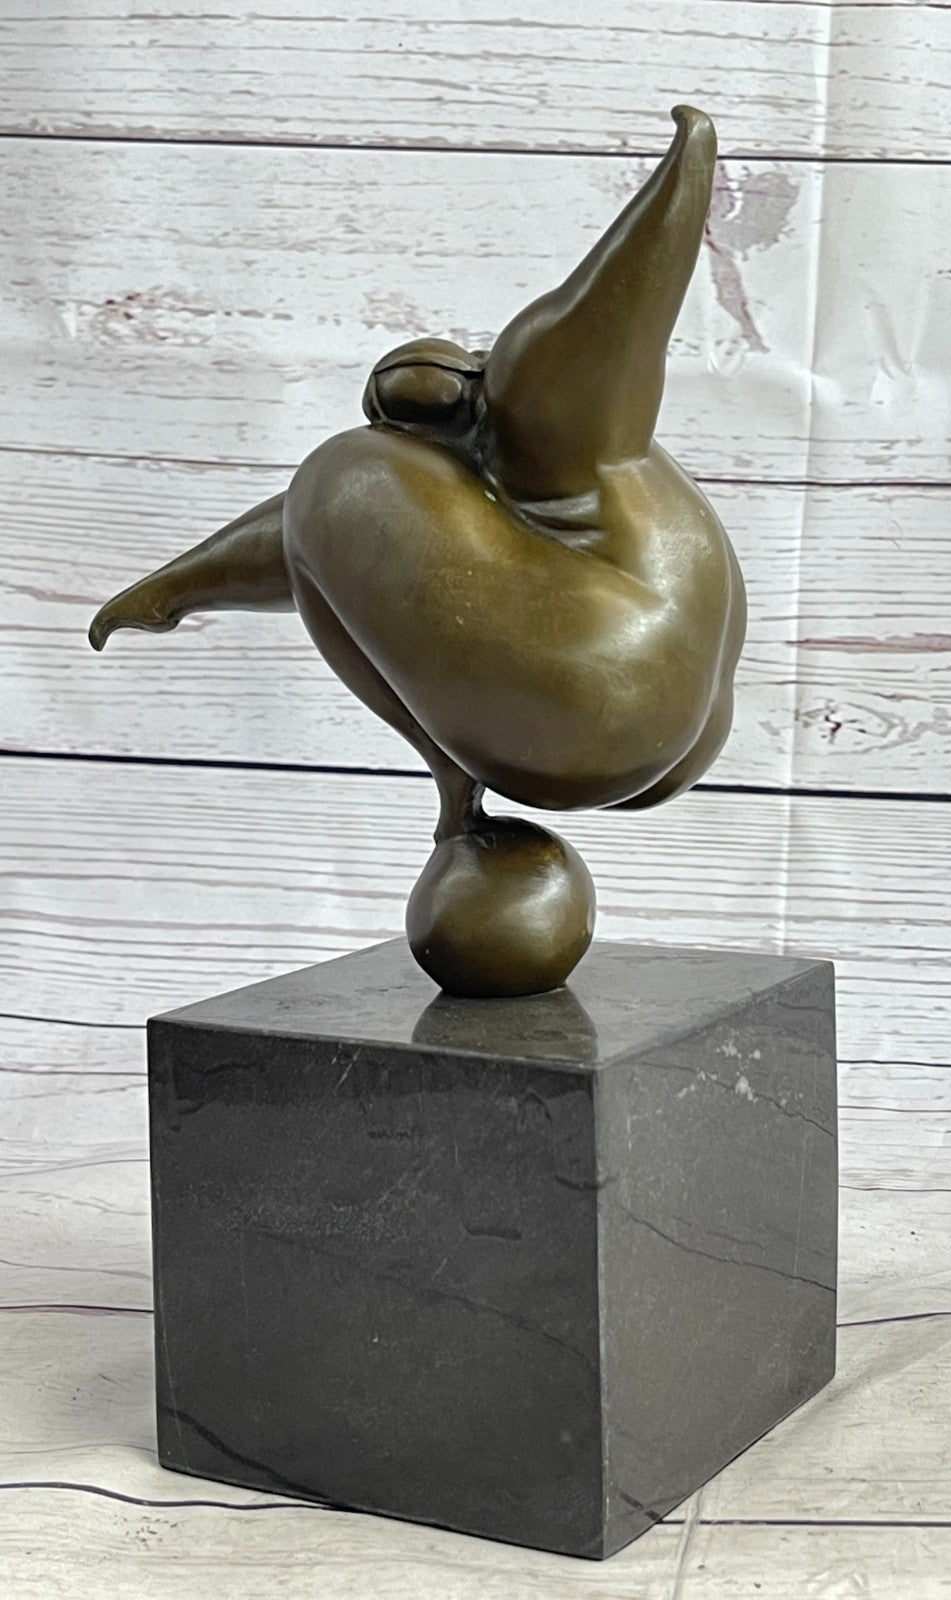 ABSTRACT SOLID BRONZE*DANCER*SCULPTURE FRENCH MILO MID CENTURY MODERNIST SALE